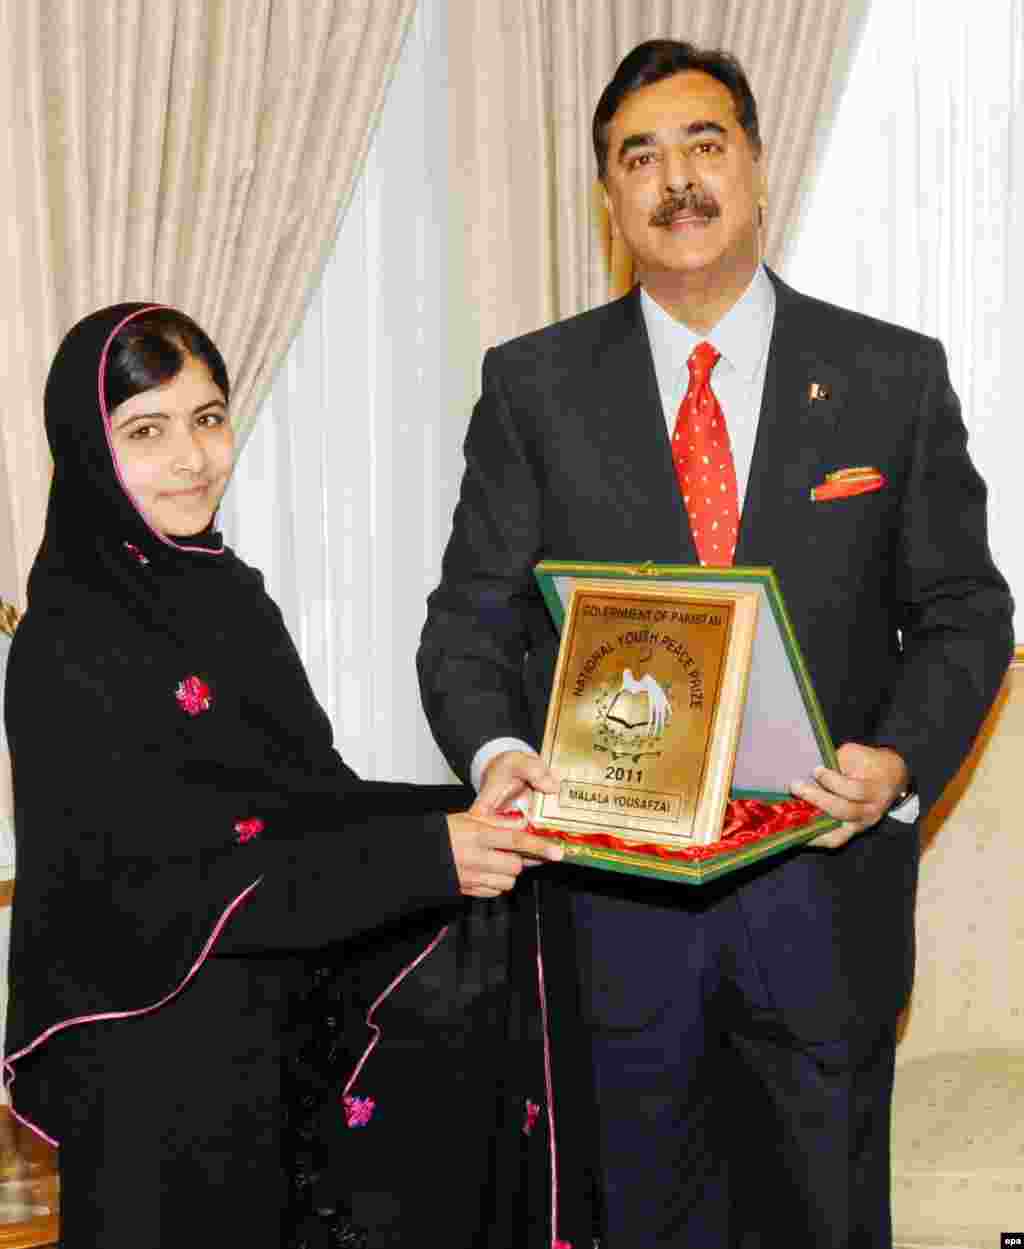 In December 2011, she received the National Youth Peace Prize from Prime Minister Yusuf Raza Gilani in Islamabad.